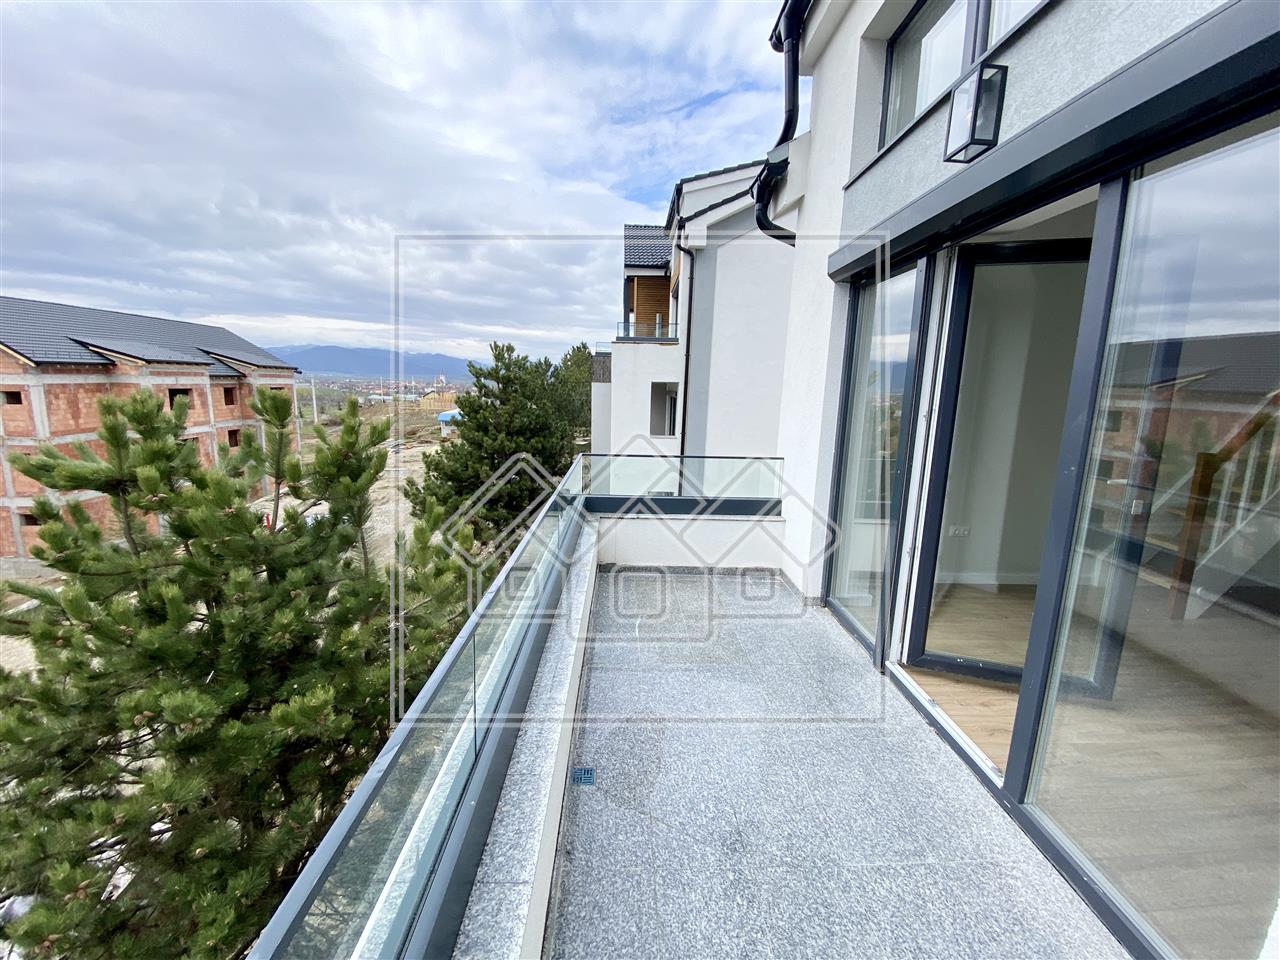 Penthouse on 2 levels - TURNKEY FINISHED - special concept, 103.55 m2